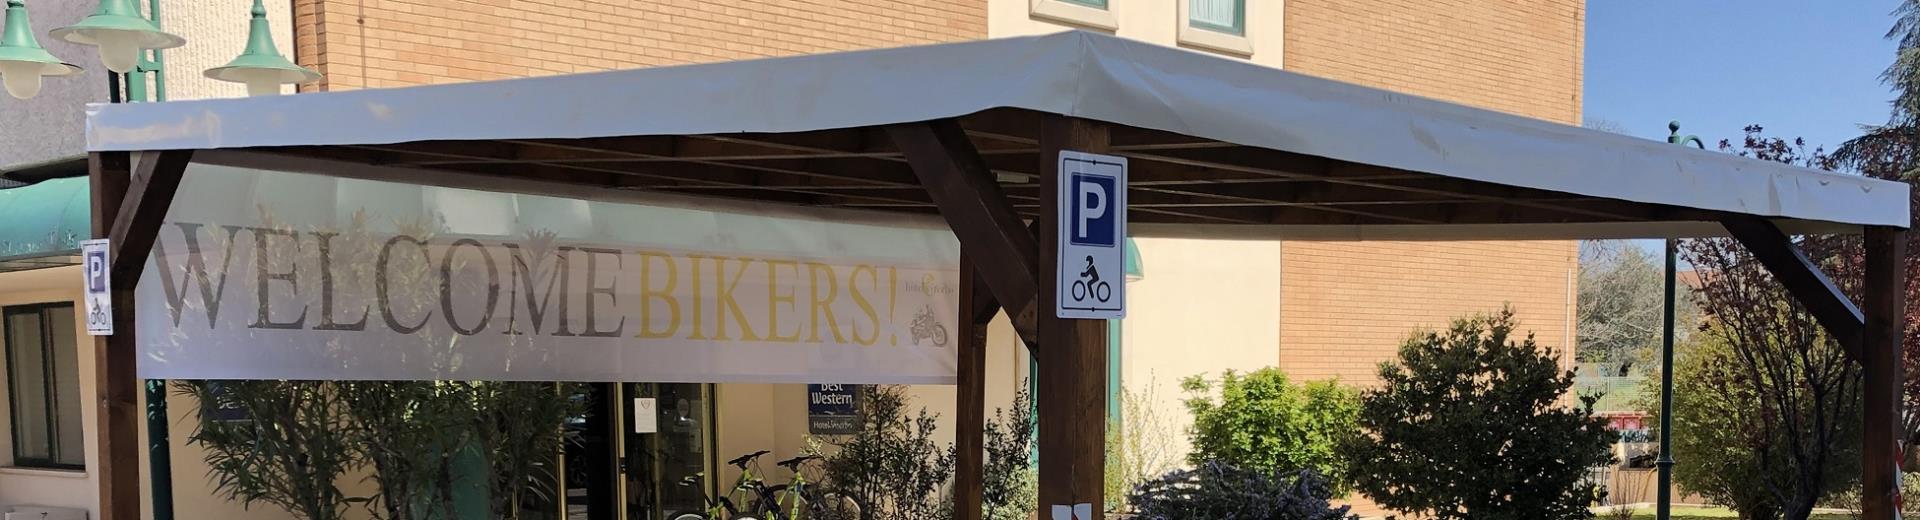 If you are traveling by motorbike and looking for a hotel in Viterbo, take advantage of our Promo BIkers: 10% discount, free motorcycle parking and many tailor-made services for motorcyclists!